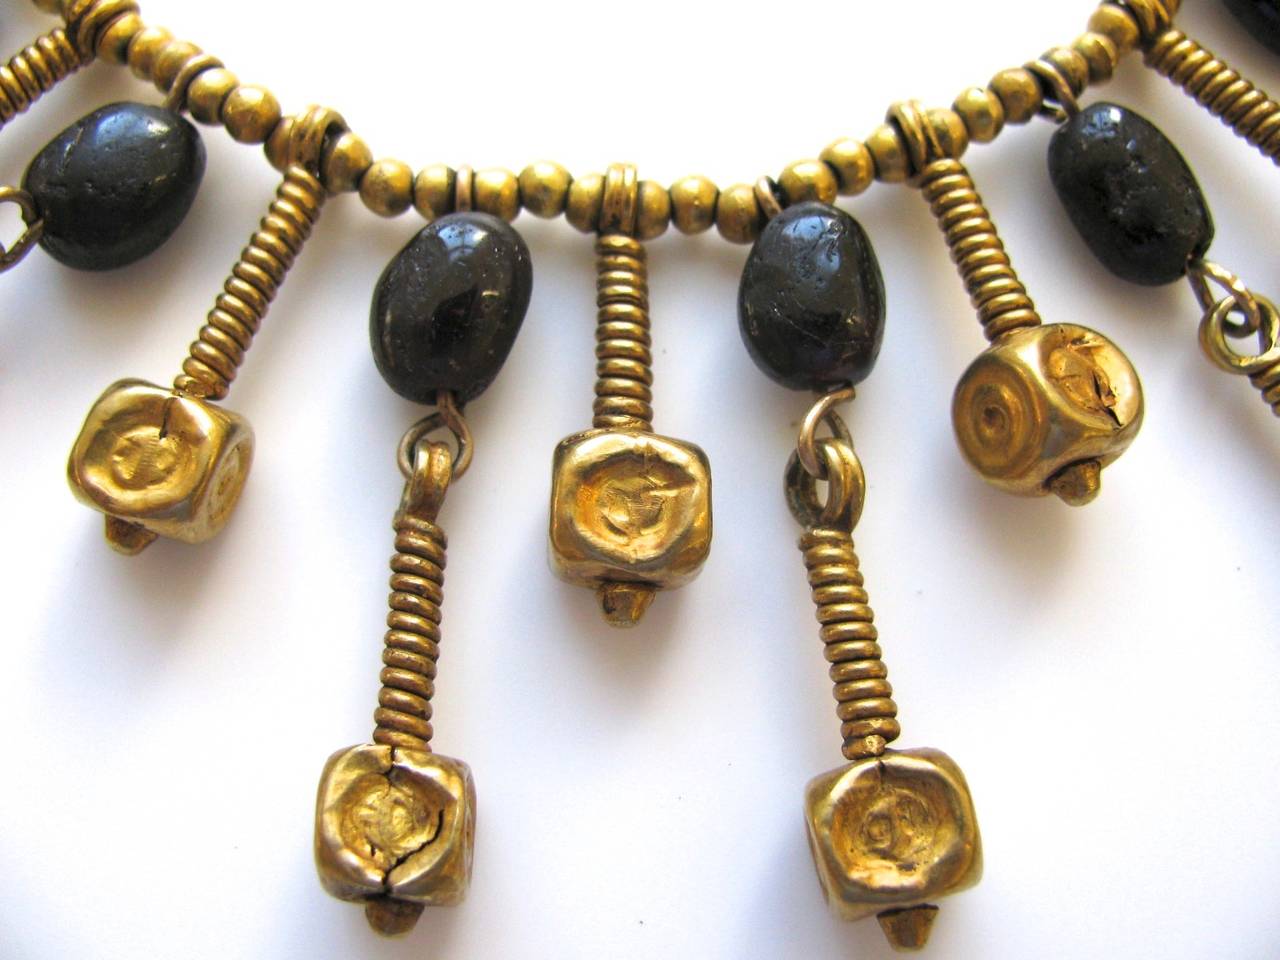 1970's ancient bead necklace by Patti Cadby Birch. The 22k yellow gold fringe necklace with gold and garnet beads on modern coiled wire-work with gold bead spacers. Birch, a collector, connoisseur and philanthropist moved to the Virgin Islands where